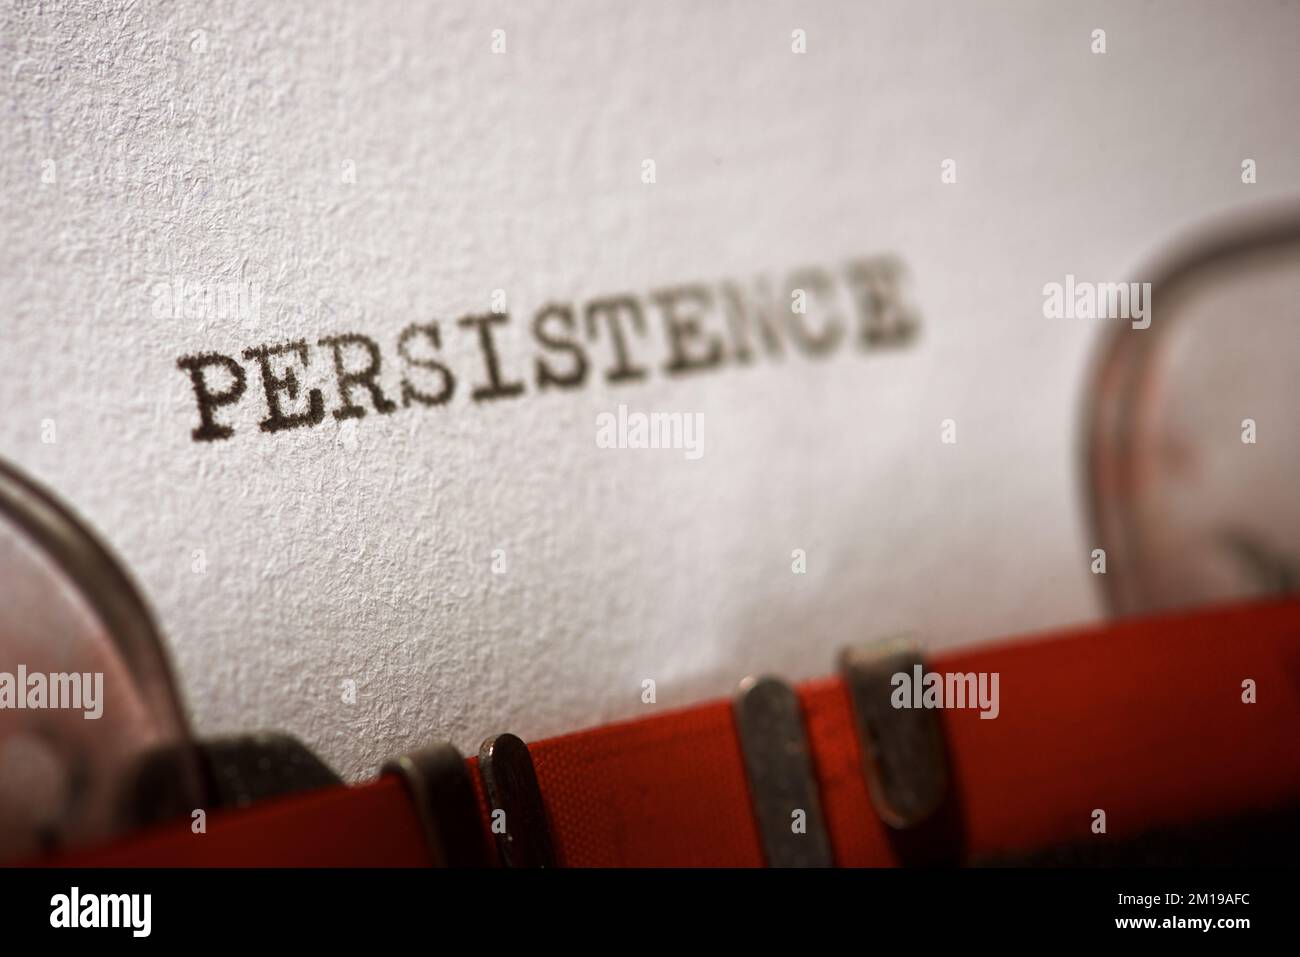 Persistence word written with a typewriter. Stock Photo